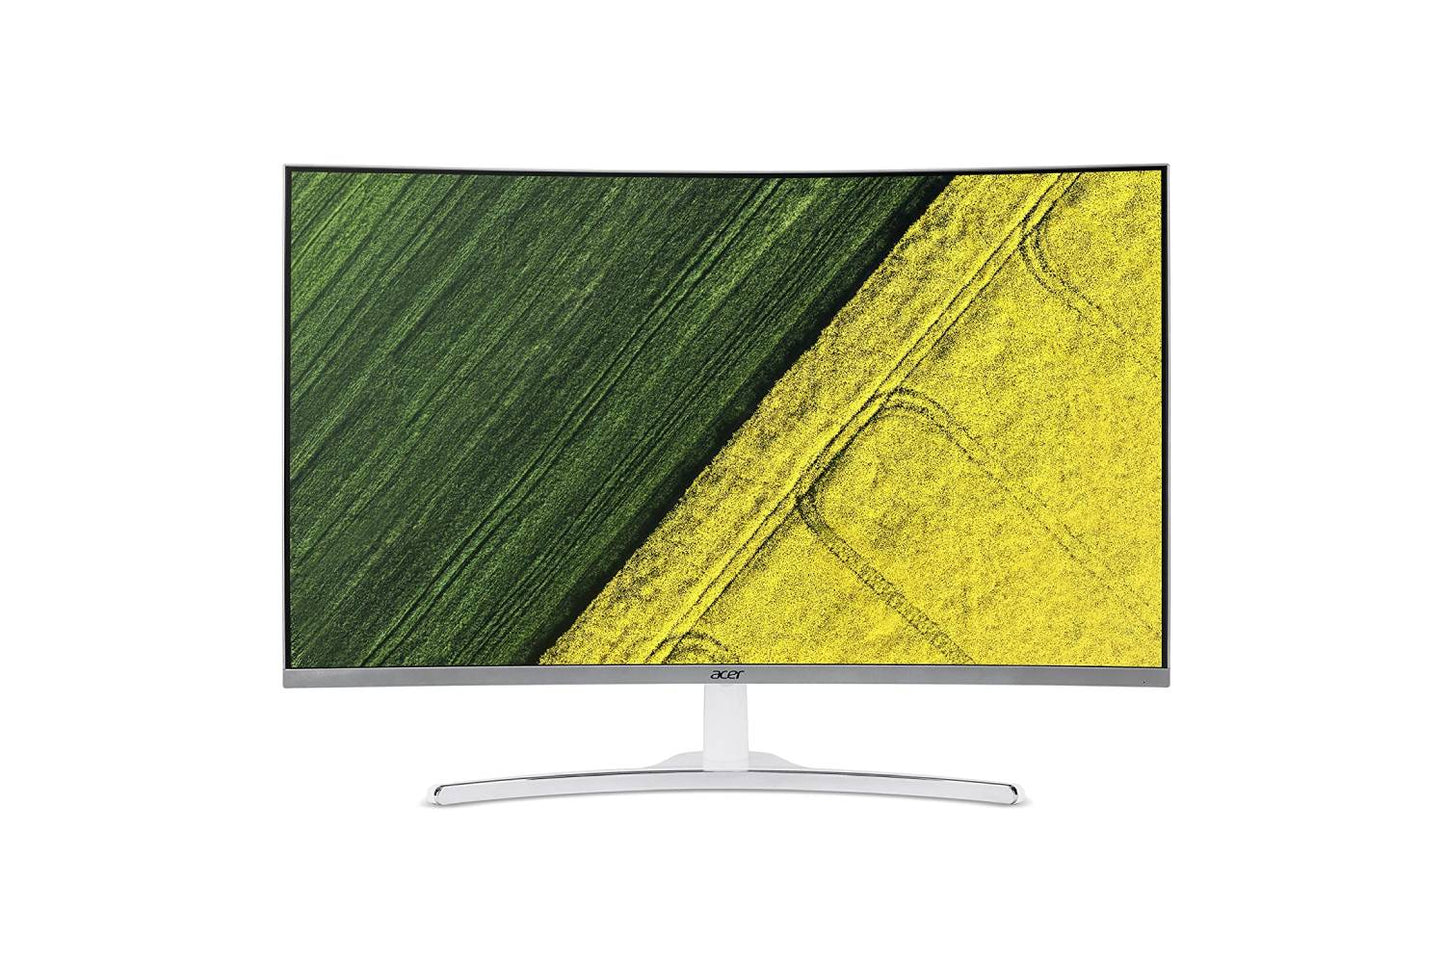 Acer 31.5-inch (80.01 cm) Curved Full HD LED Backlit Computer Monitor with Stereo Speakers - ED322Q (White)